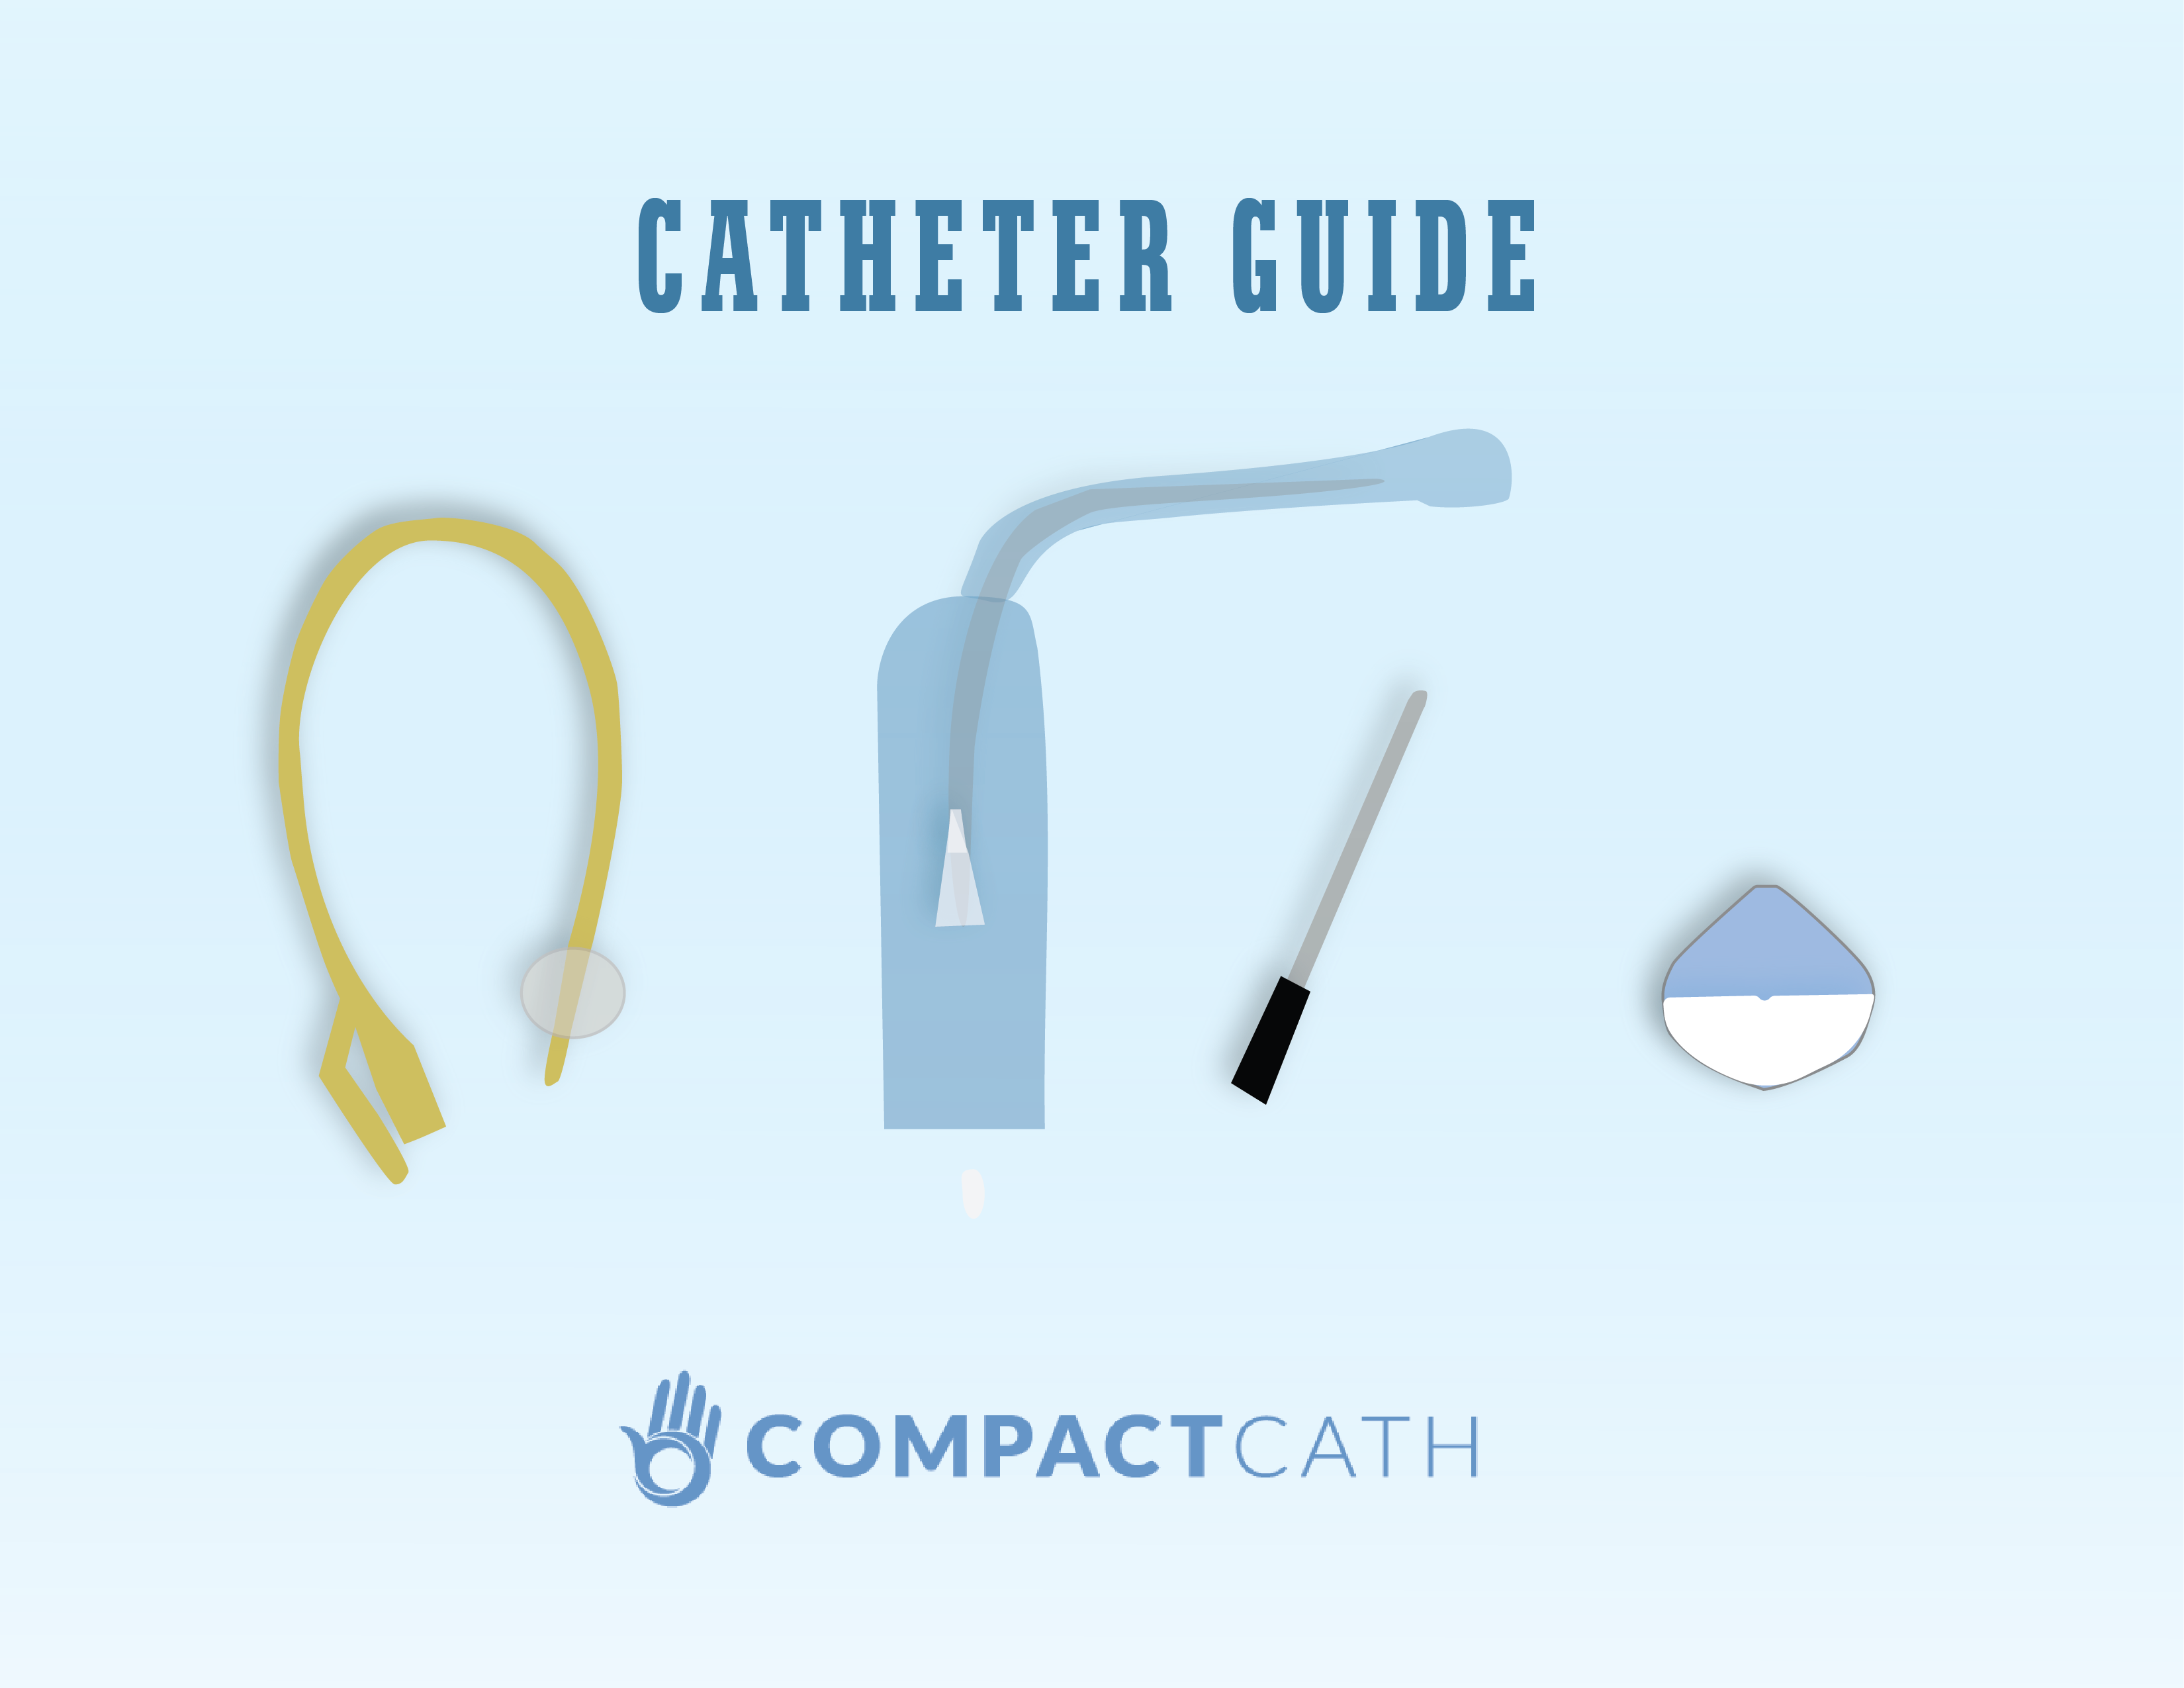 French Size Chart Catheter